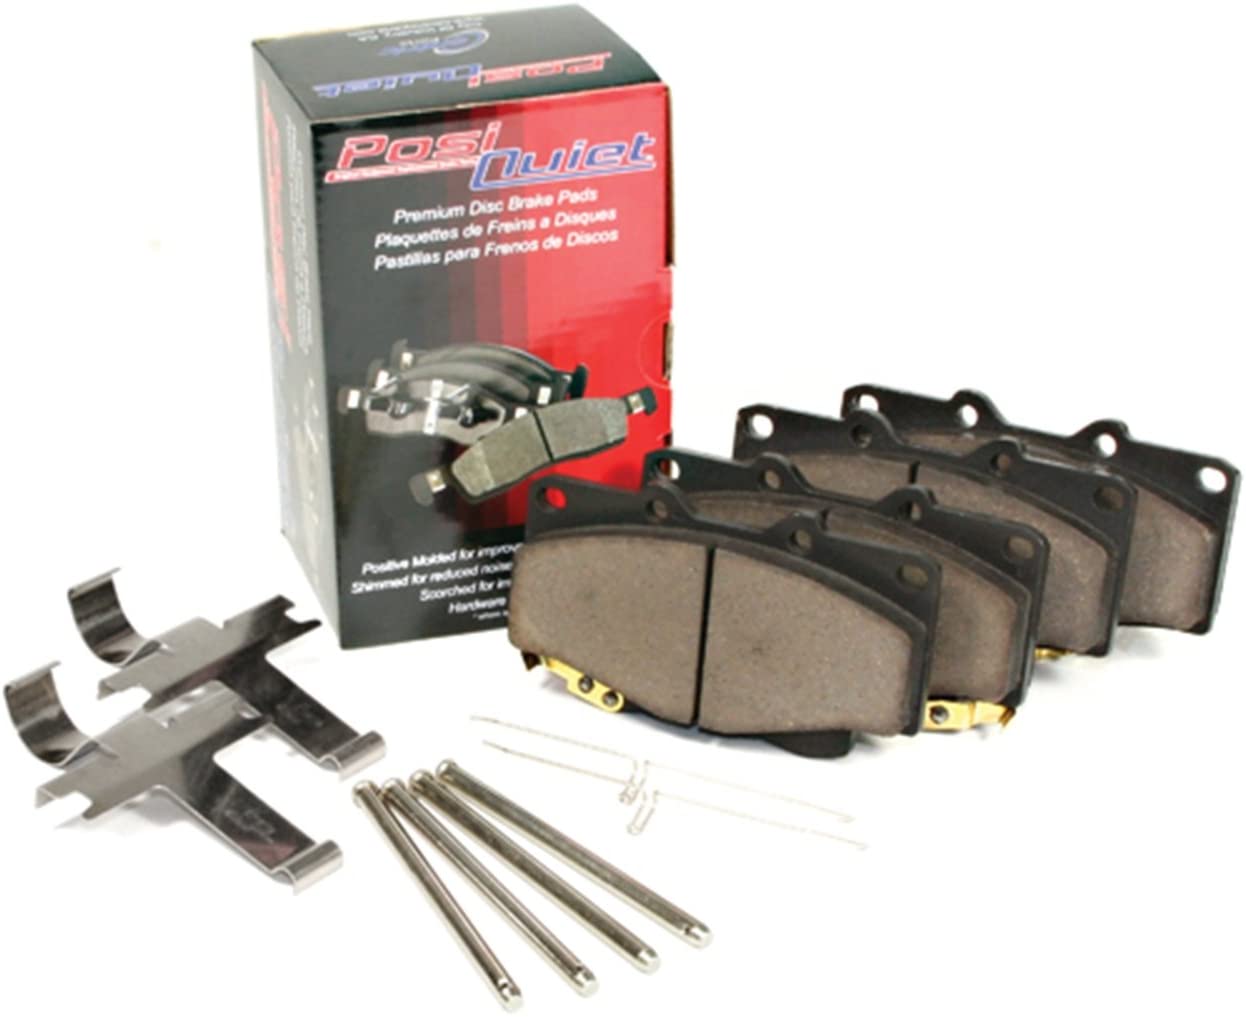 10 Best Brake Pads For Toyota Tundra